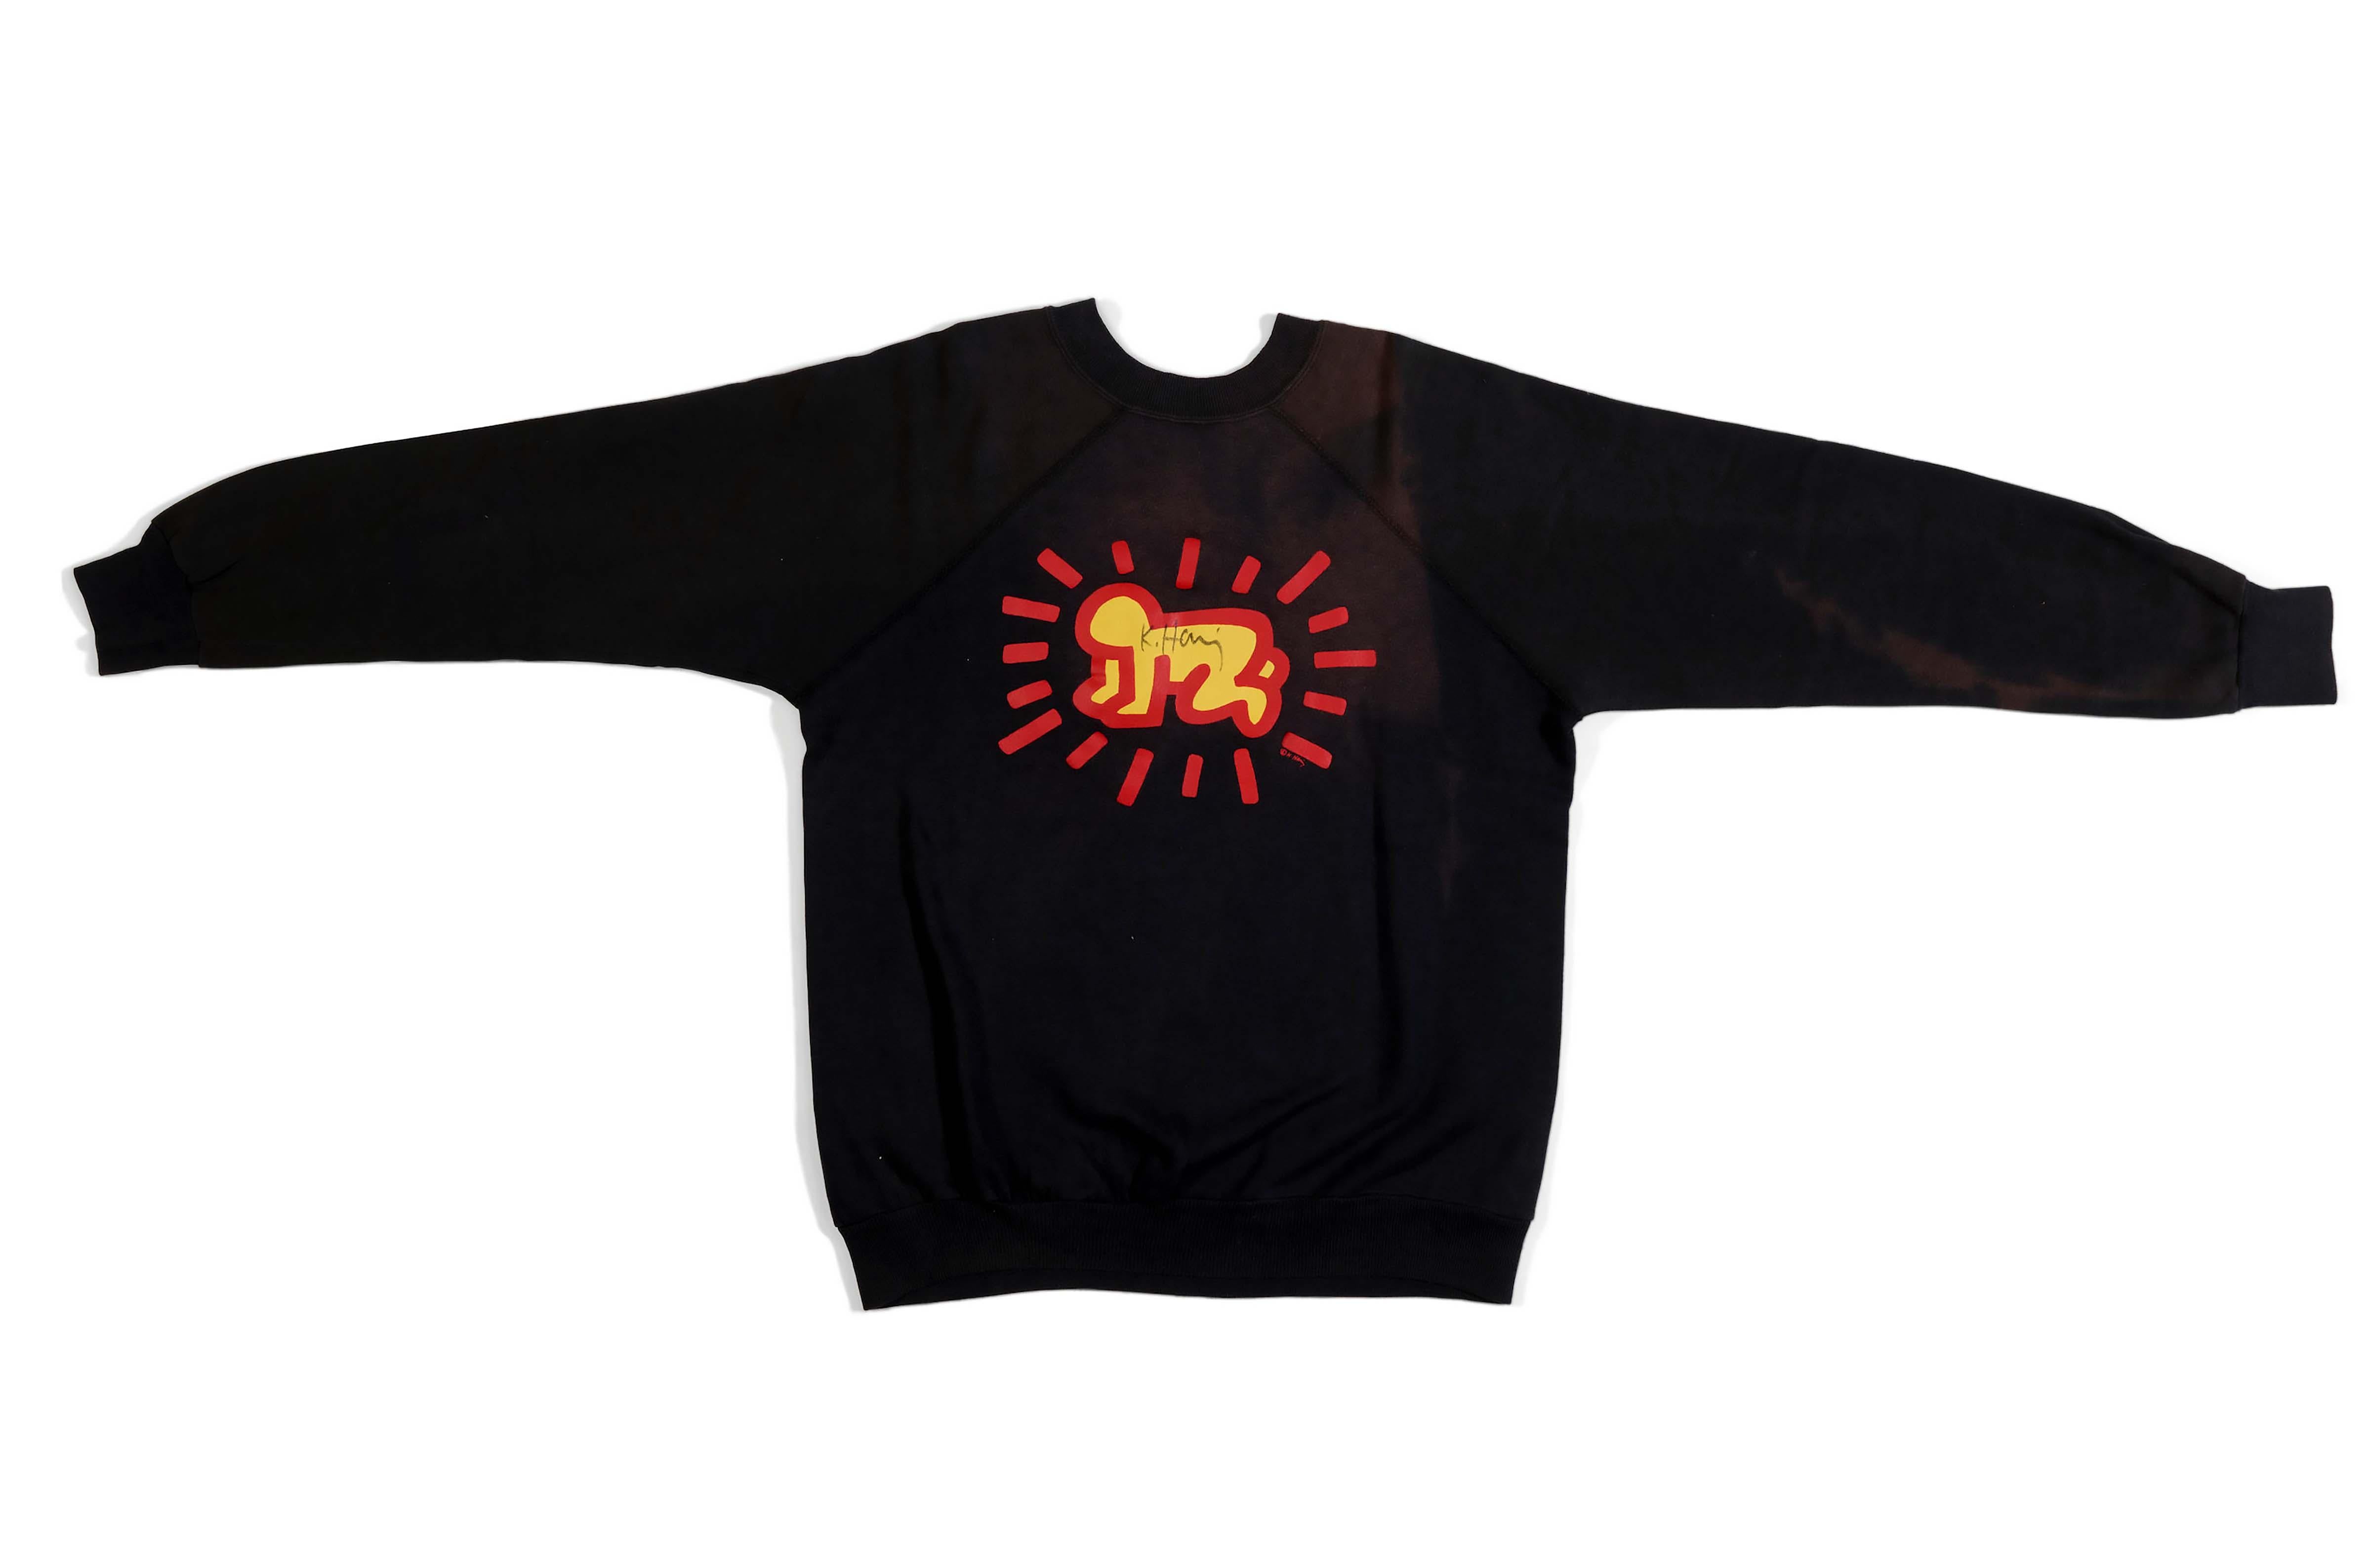 Rare hand-signed Keith Haring Pop Shop sweatshirt circa 1986: 

A much historical hand-signed 1980s Keith Haring Pop Shop collectible produced during the early days of the famed Haring Pop Shop. The sweatshirt features Haring's Radiant Baby &